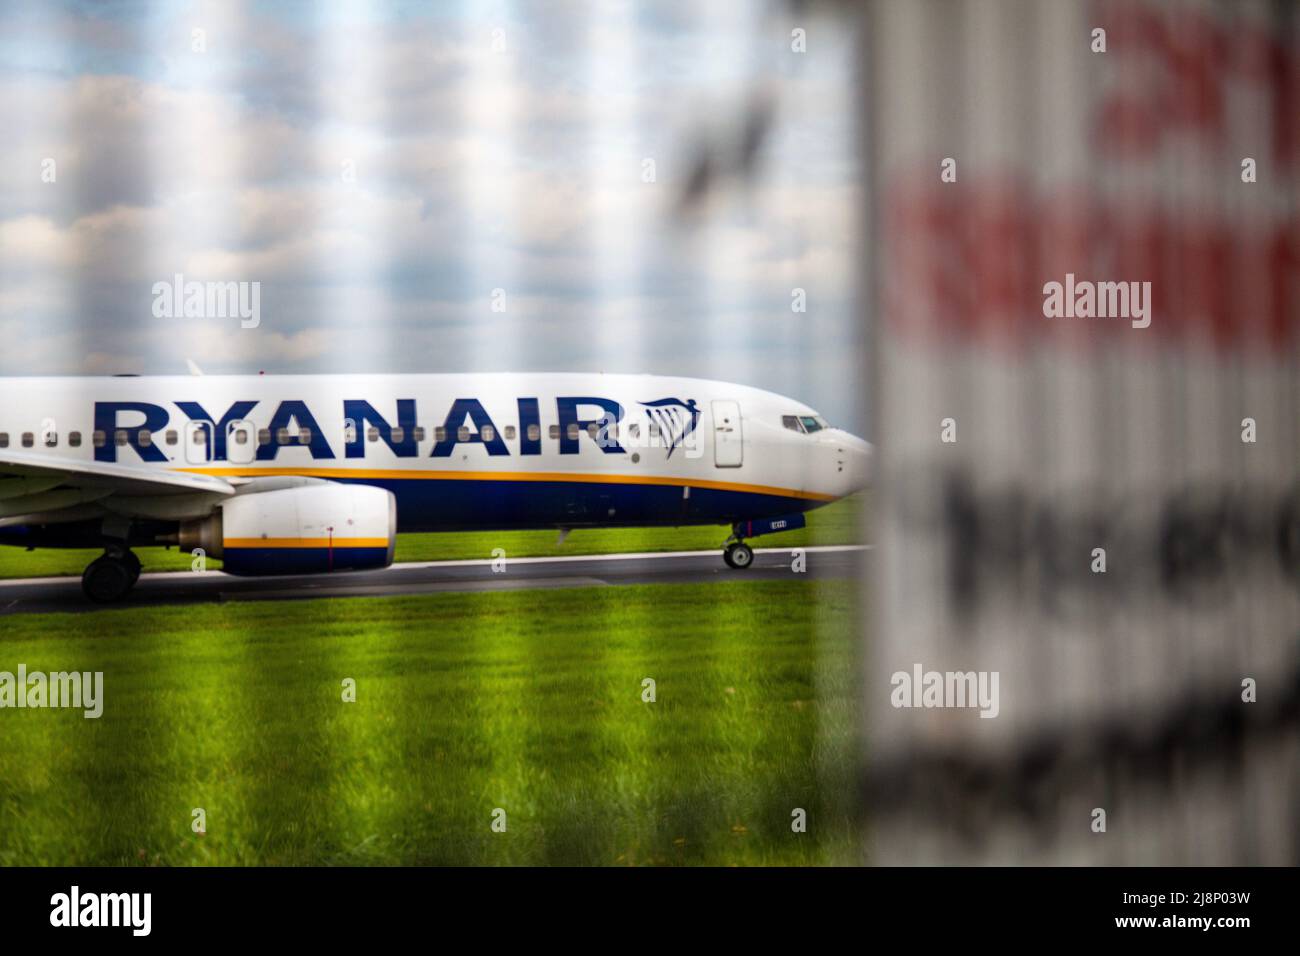 Ryanair aeroplane on runway going to take off at Manchester Airport Stock Photo